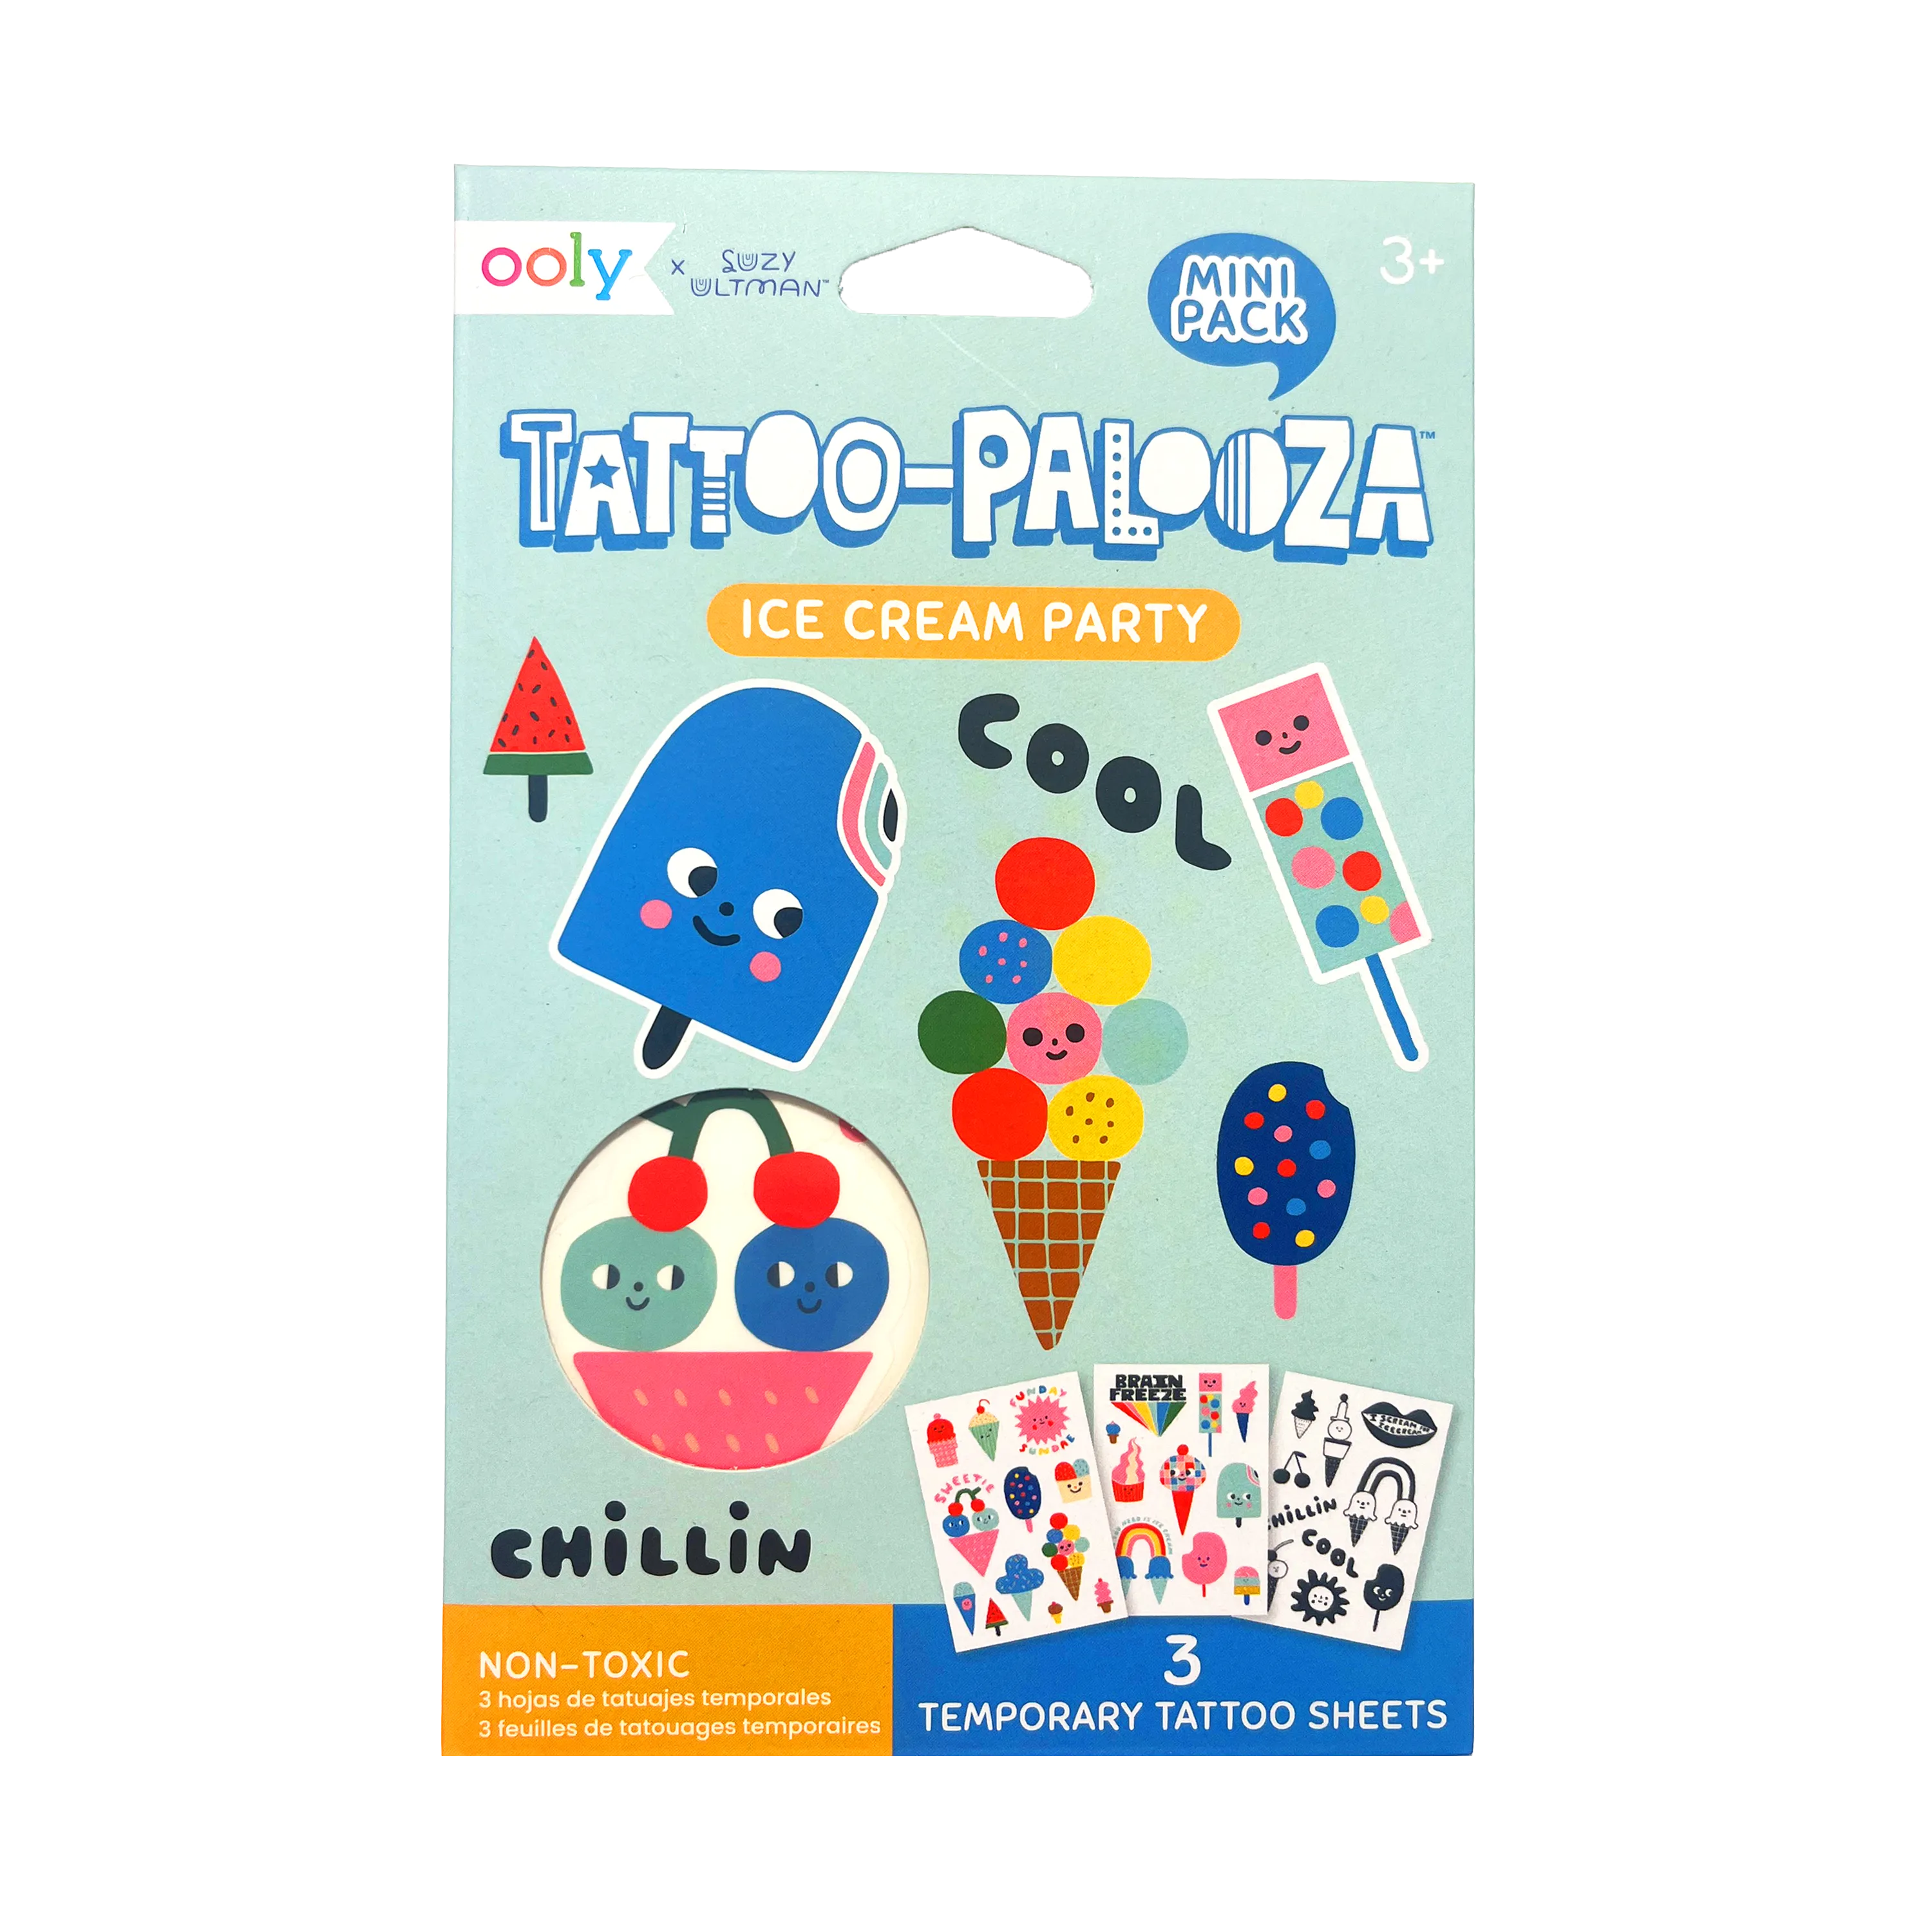 OOLY Tattoo-Palooza x Suzy Ultman: Temporary Tattoos Mini Pack - Ice Cream Party front of packaging